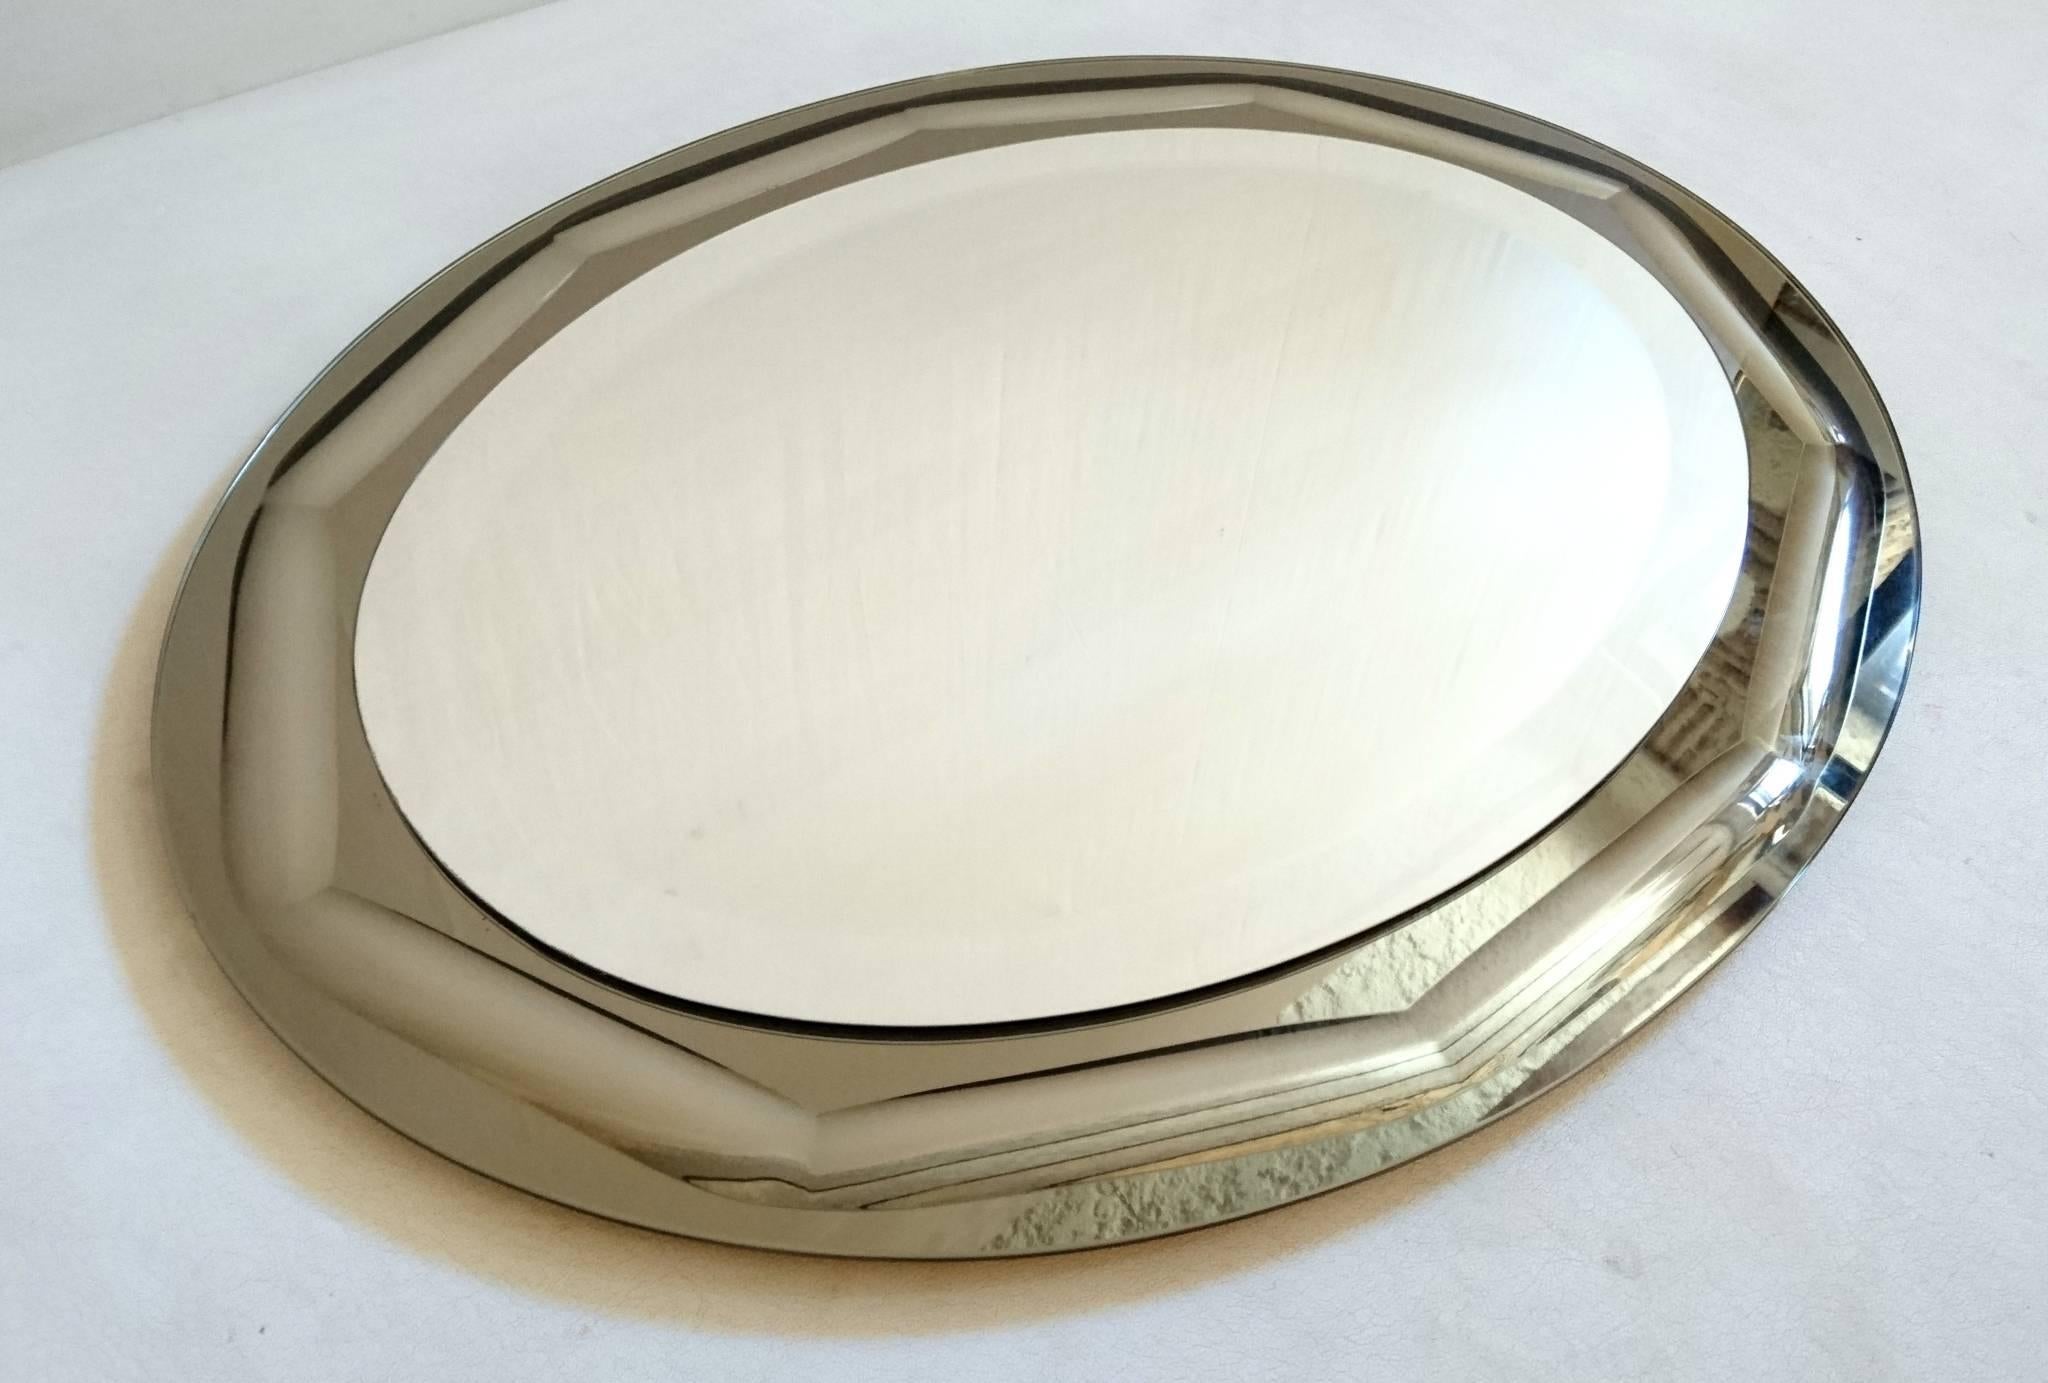 Vintage Italian oval, all glass mirror by Cristal Lupi Luxor (Antonio Lupi). The main bevelled glass plate is mounted onto an oval smoked, silvery colored glass frame, which in some lights looks a silvery beige. Can be hung in landscape or